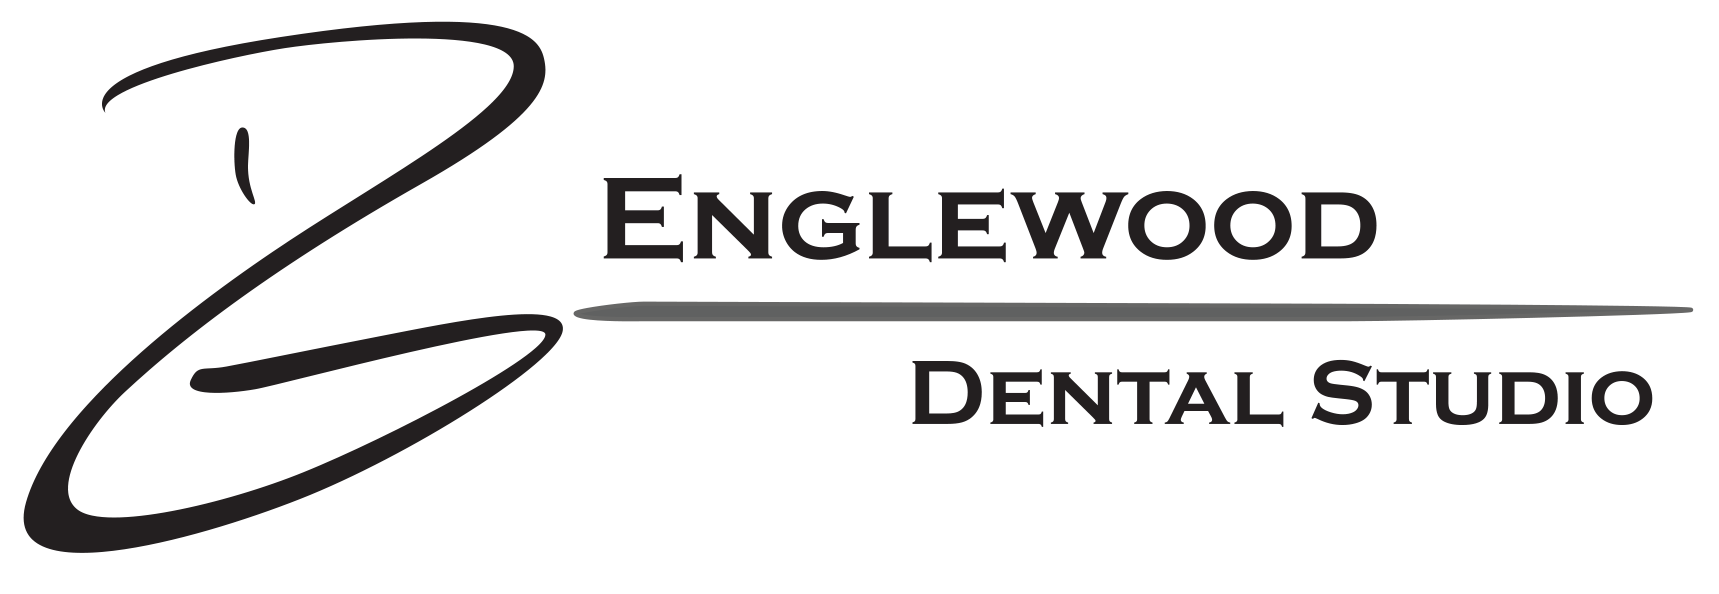 Link to Englewood Dental Studio home page